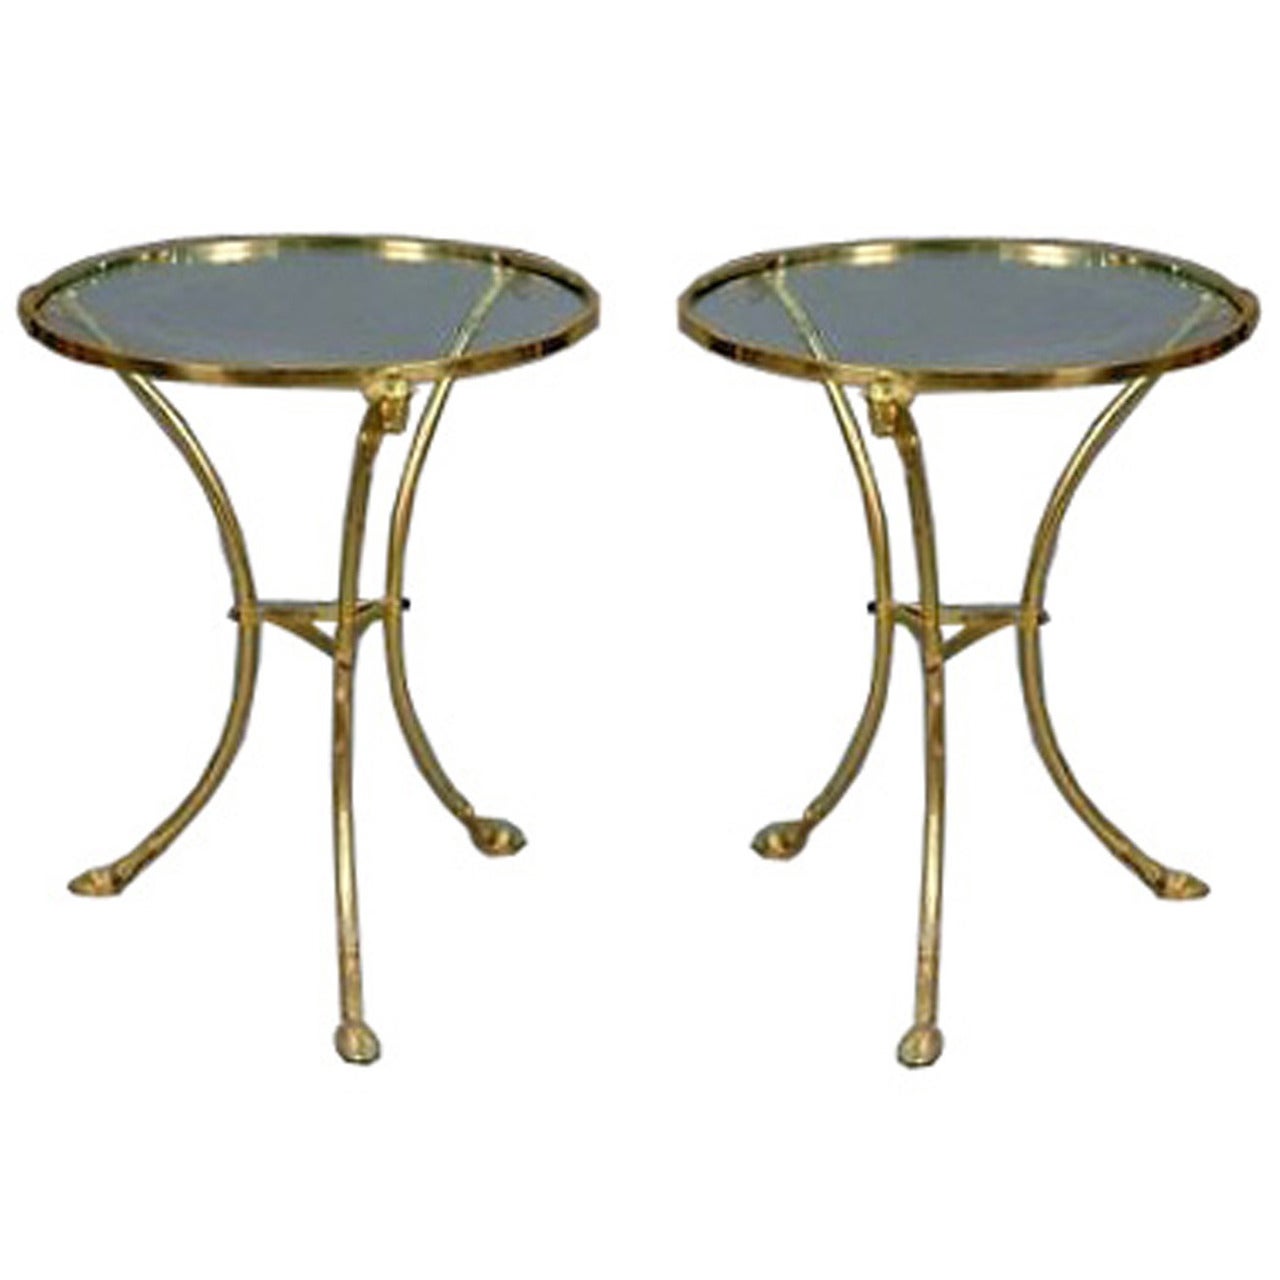 Hollywood Regency Pair of Brass and Glass Gueridon Side Tables